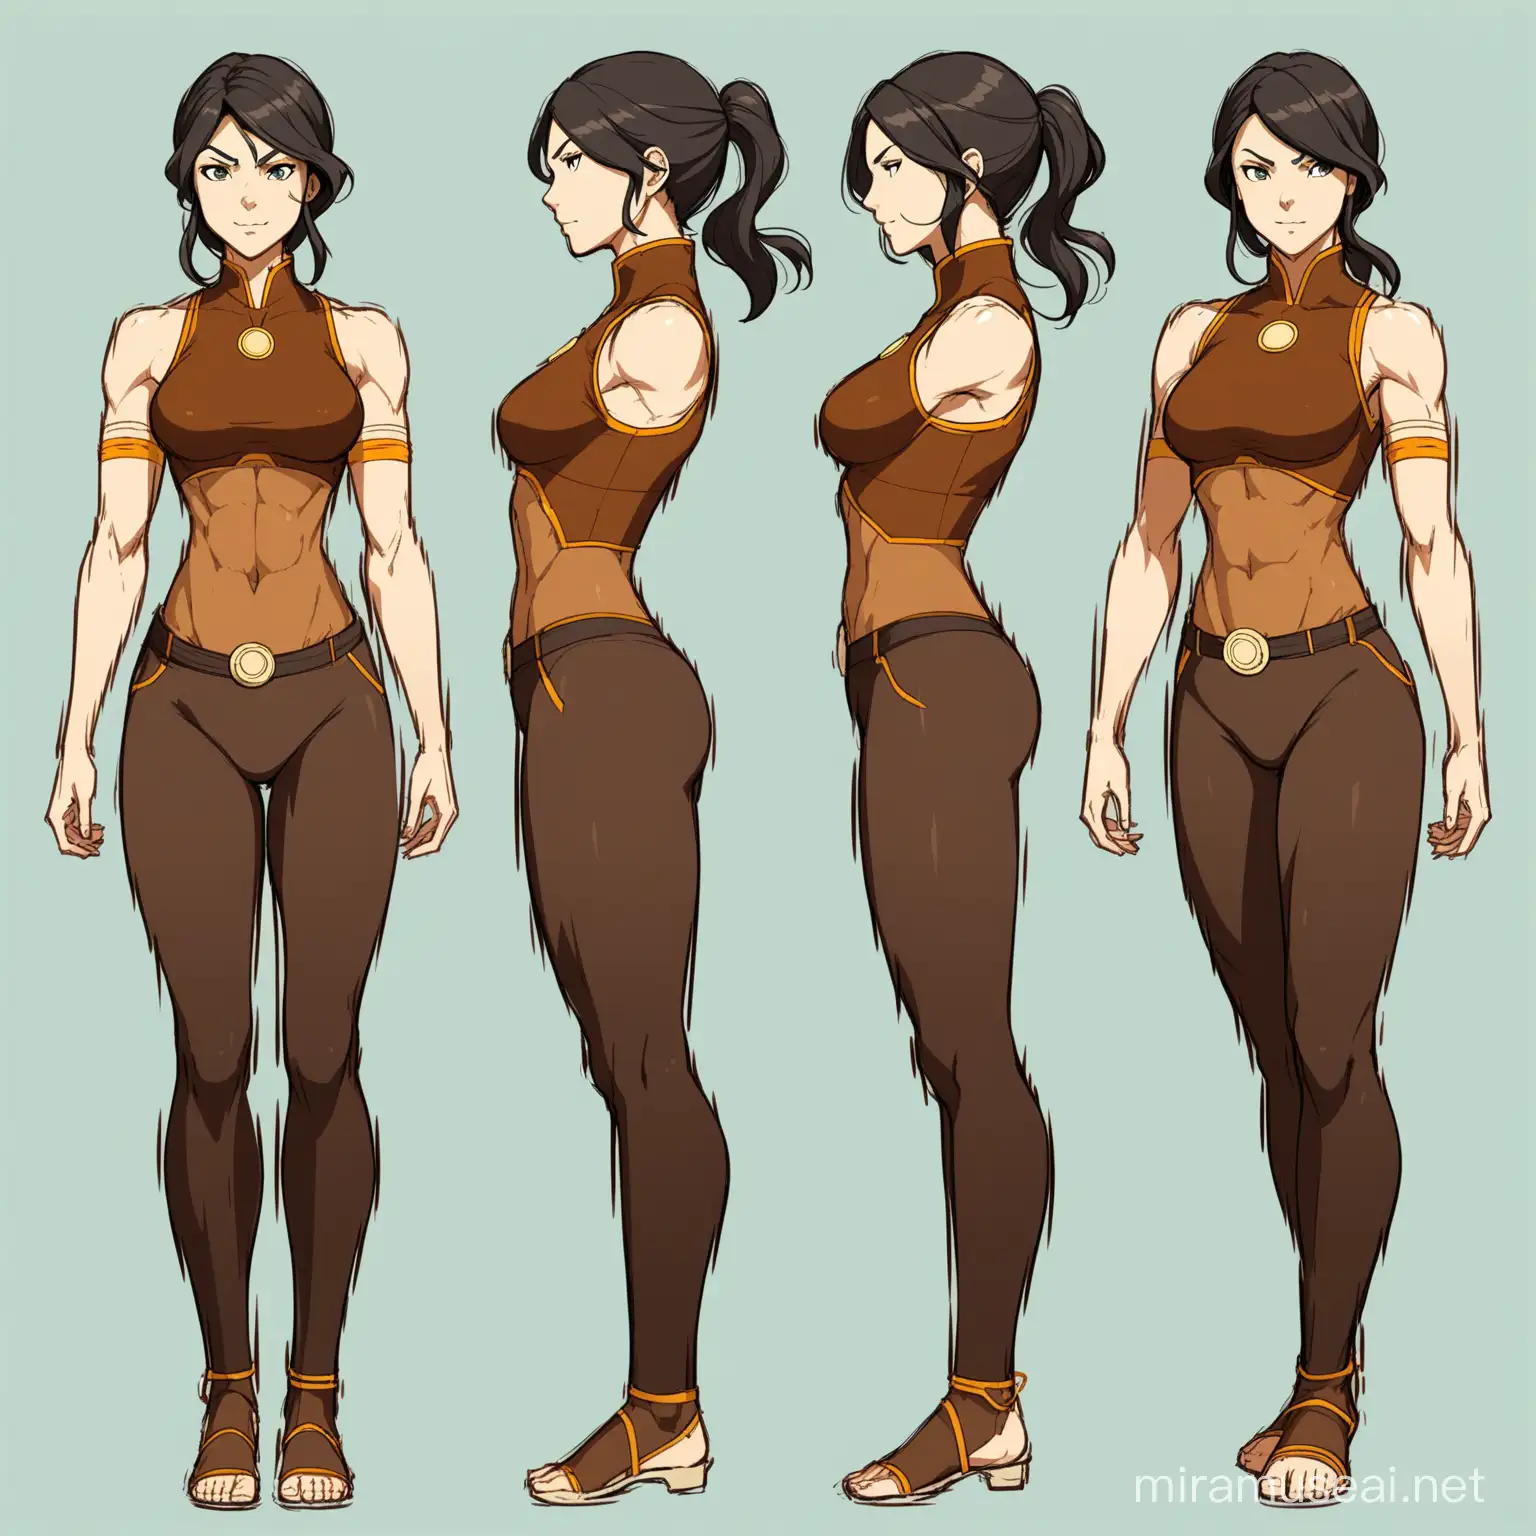 Dynamic Mature Female Figure in Playful Poses Inspired by The Legend of Korra